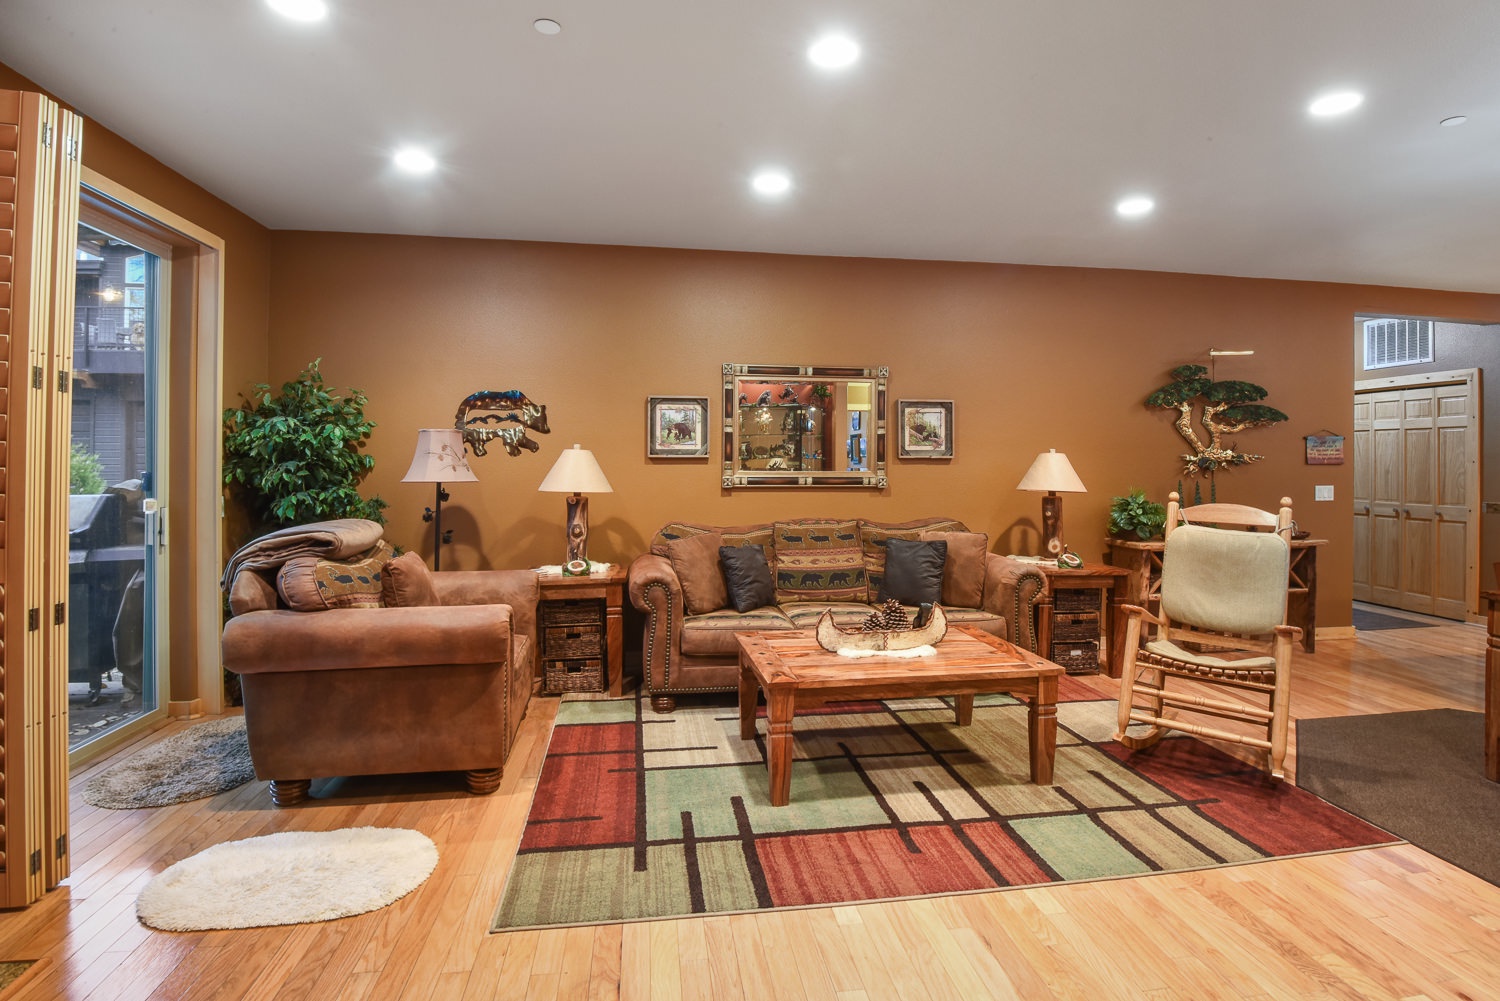 Open living space with ample seating, fireplace, Smart TV, and patio access